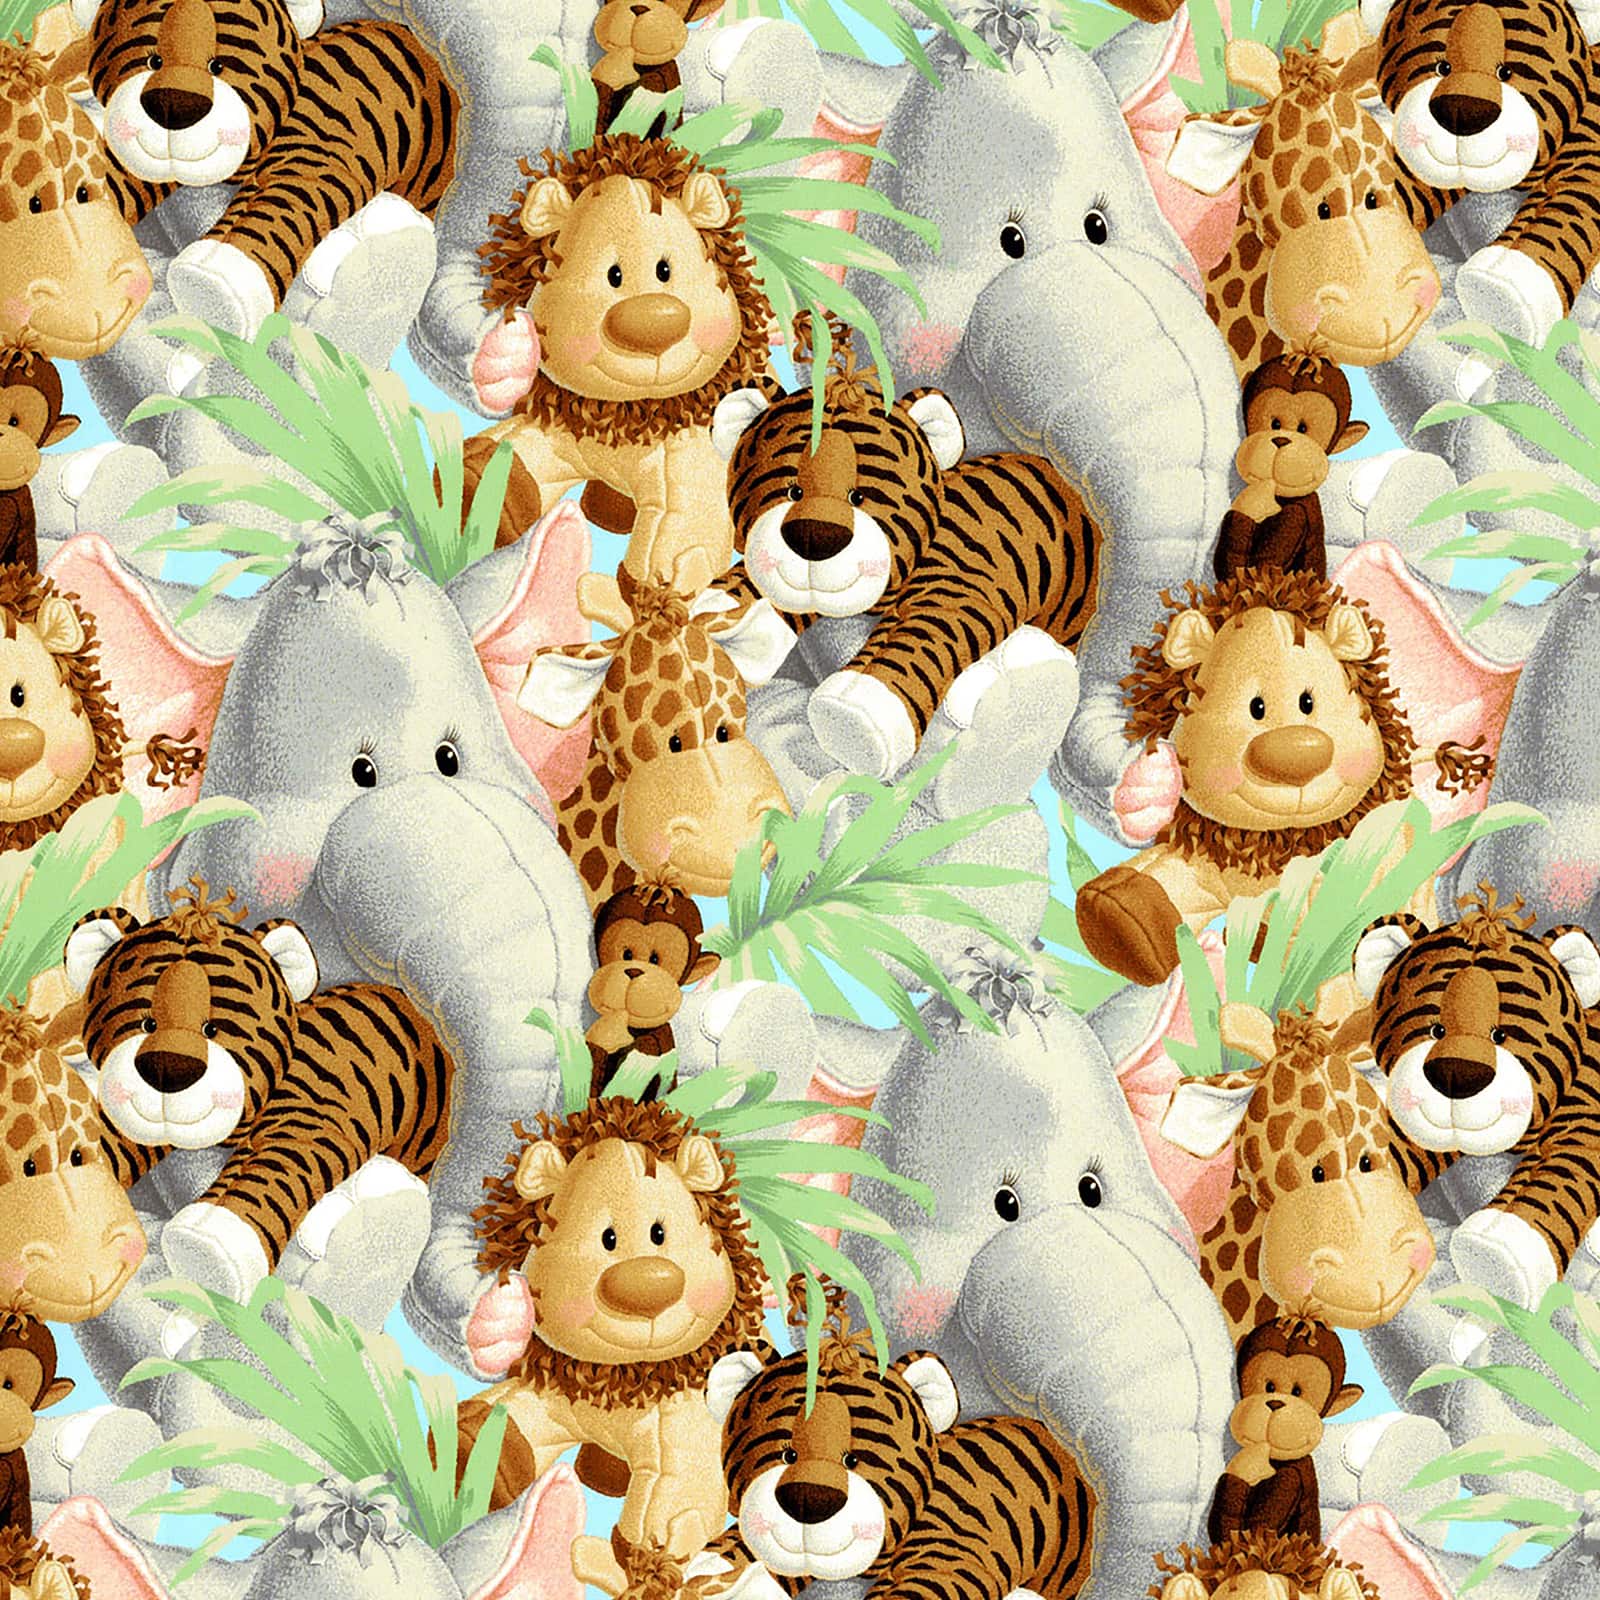 Fabric Traditions Bright Multicolor Packed Jungle Babies Cotton Fabric